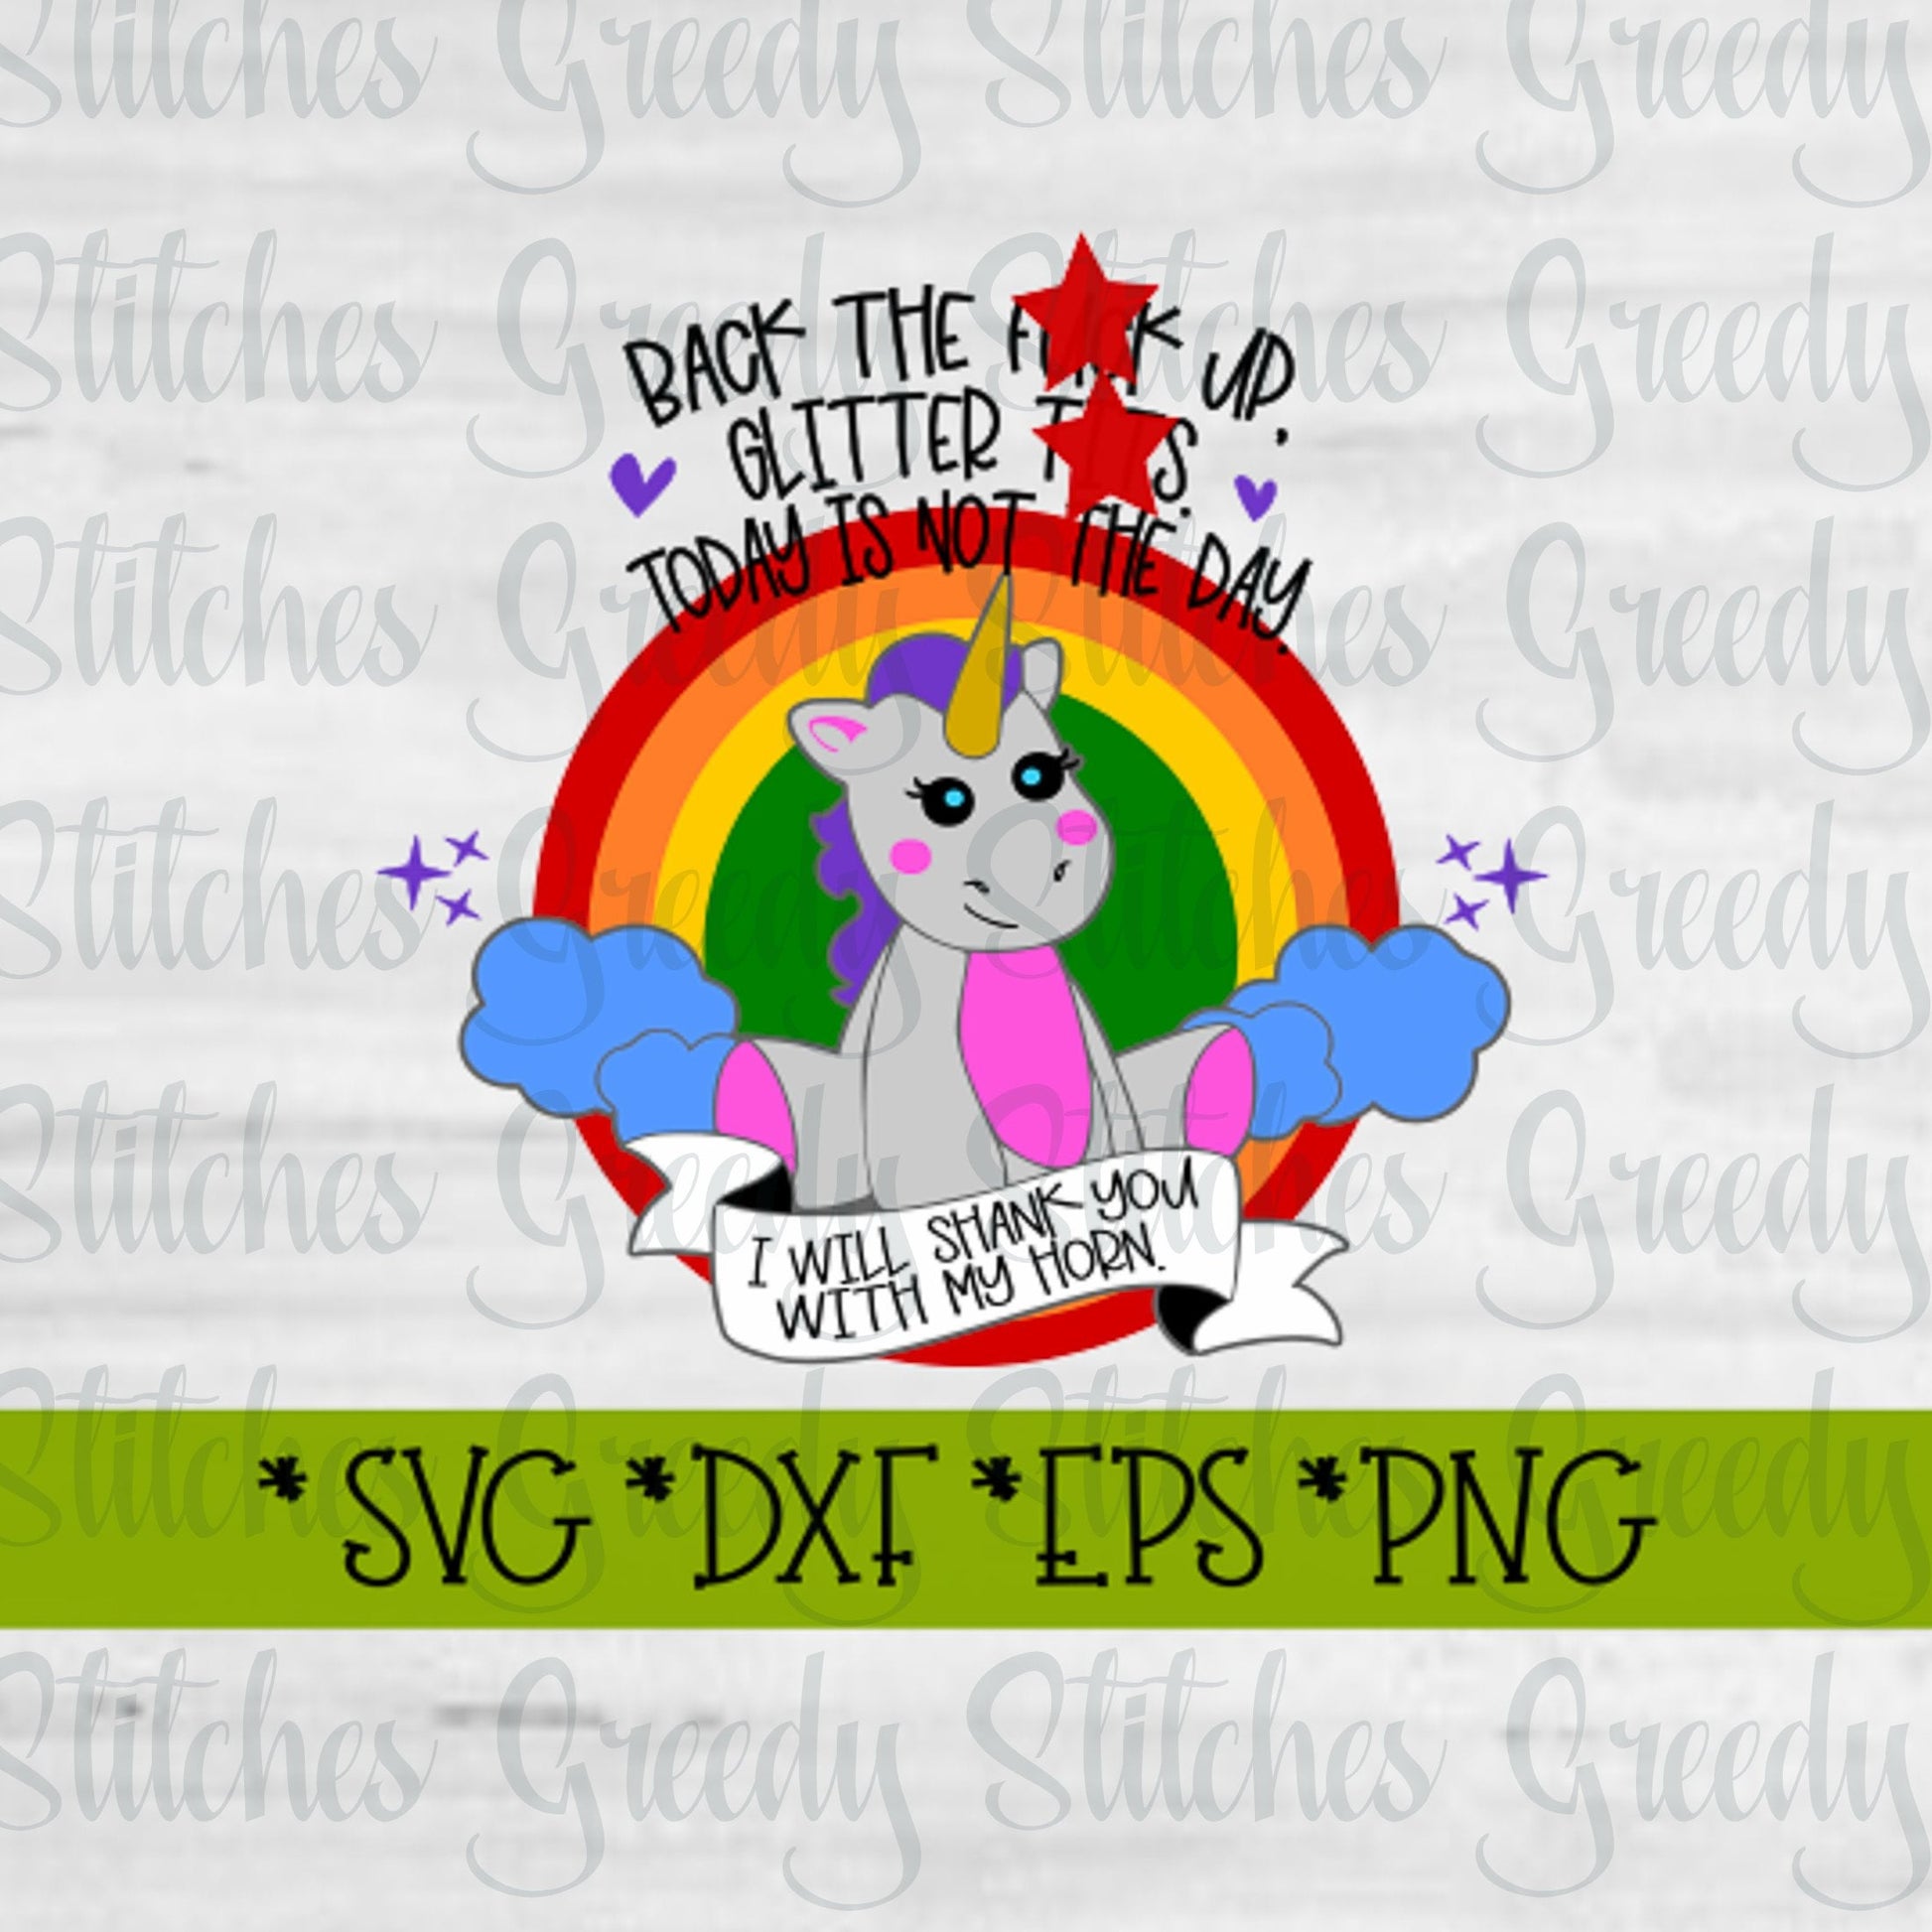 Back The F#ck Up, Glitter T!ts SvG, DxF, EpS, PnG. Unicorn SvG | I Will Shank You SvG | Glitter Tits SvG | Funny | Instant Download Cut File